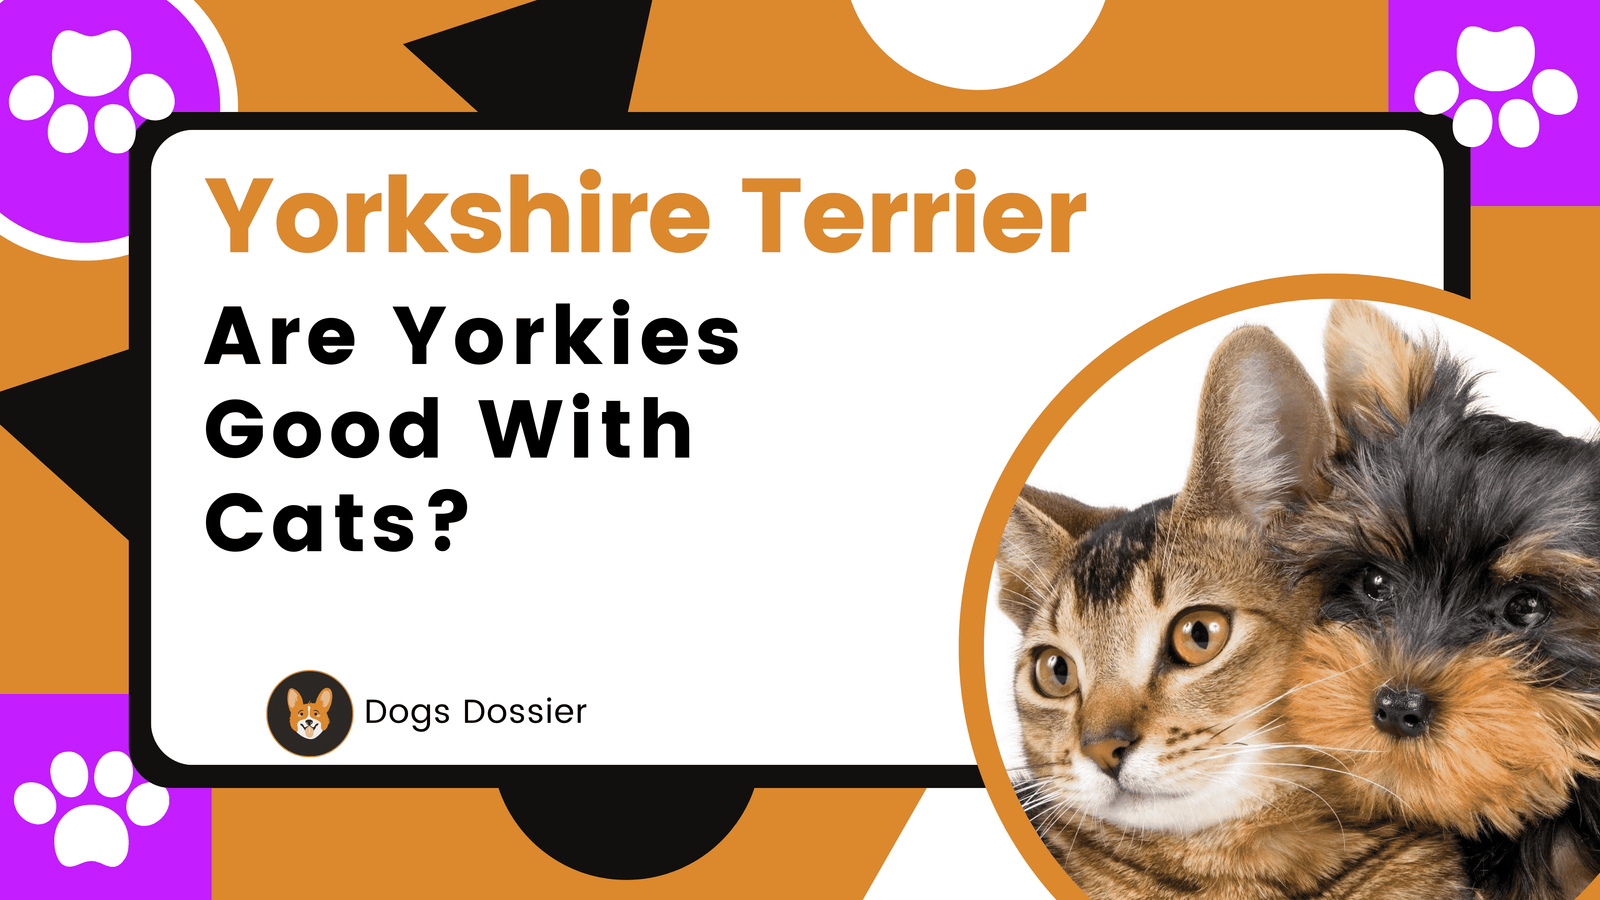 Are Yorkies Good with Cats?